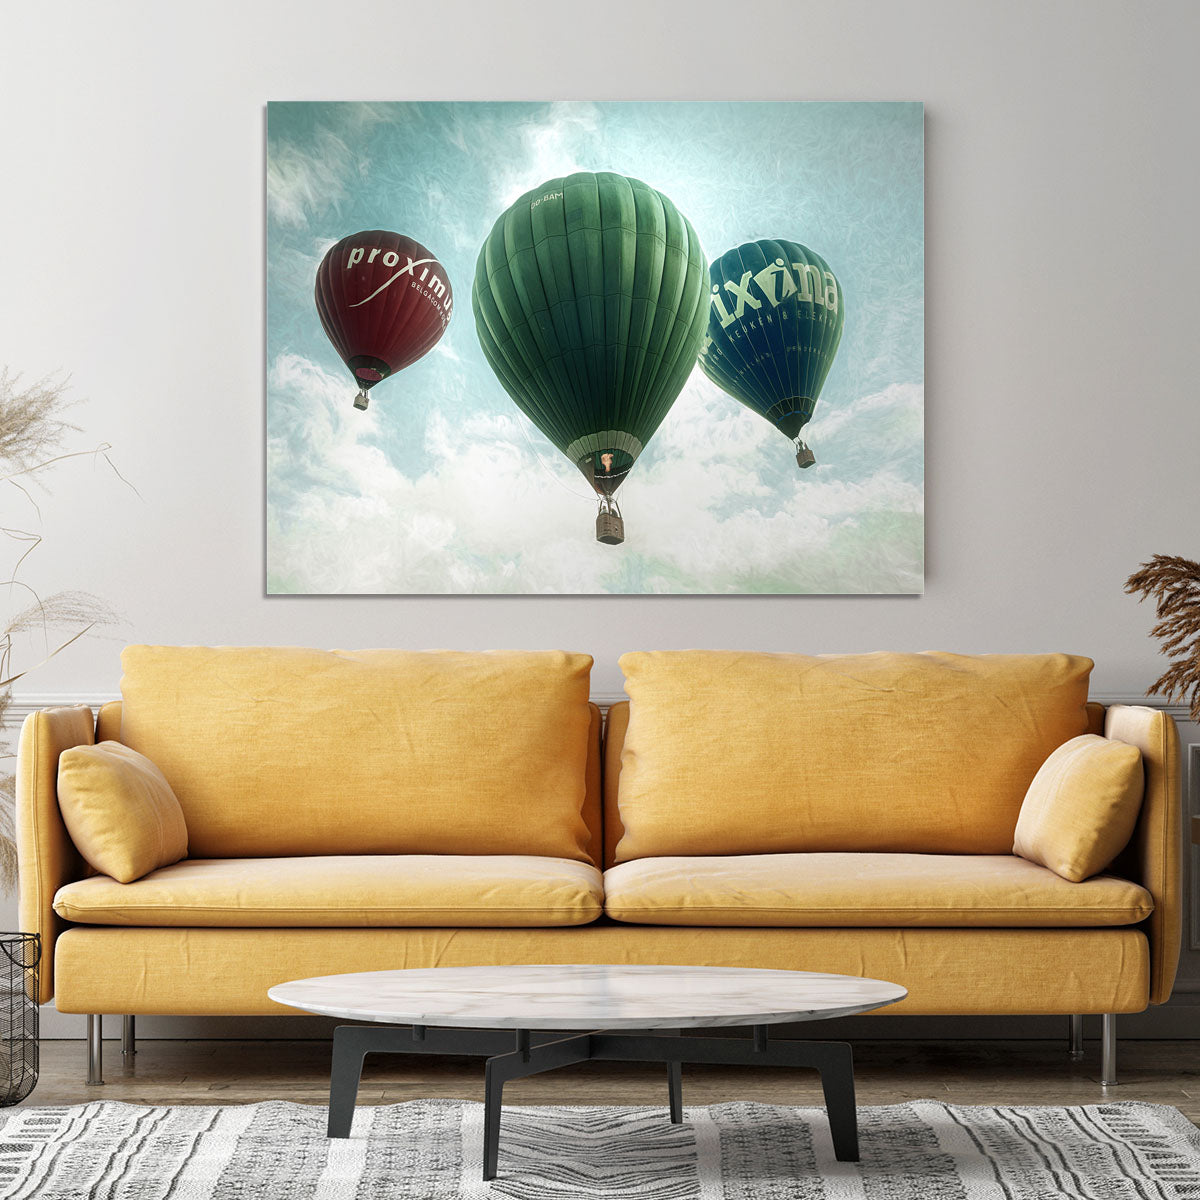 Full colour Canvas Print or Poster - 1x - 4